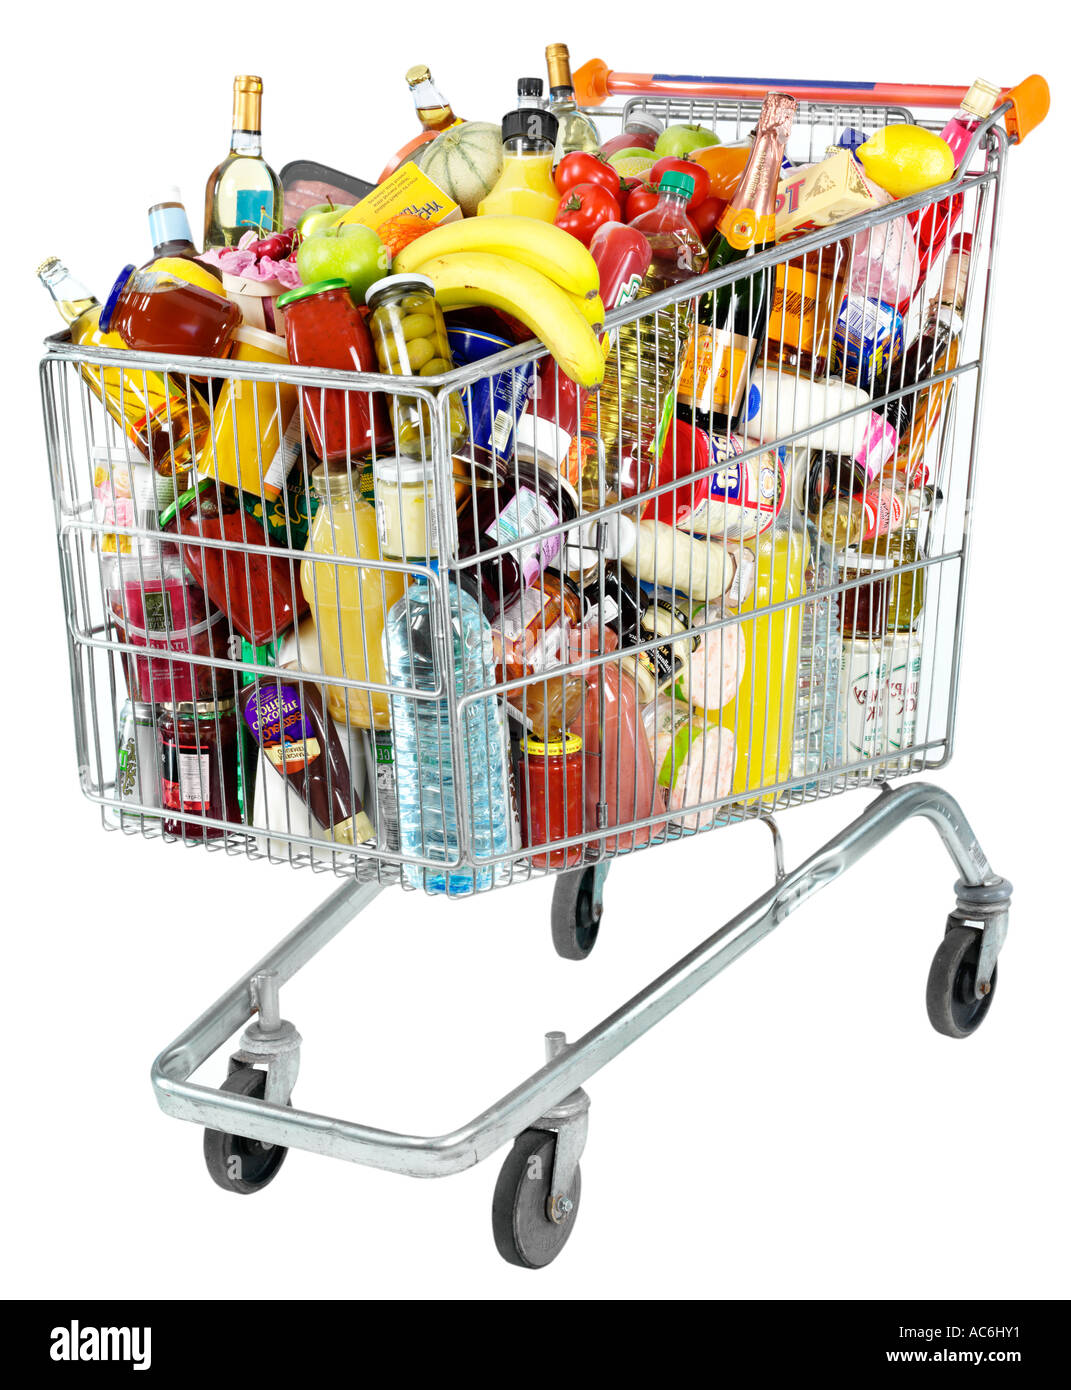 SHOPPING TROLLEY / GROCERY CART Stock Photo - Alamy